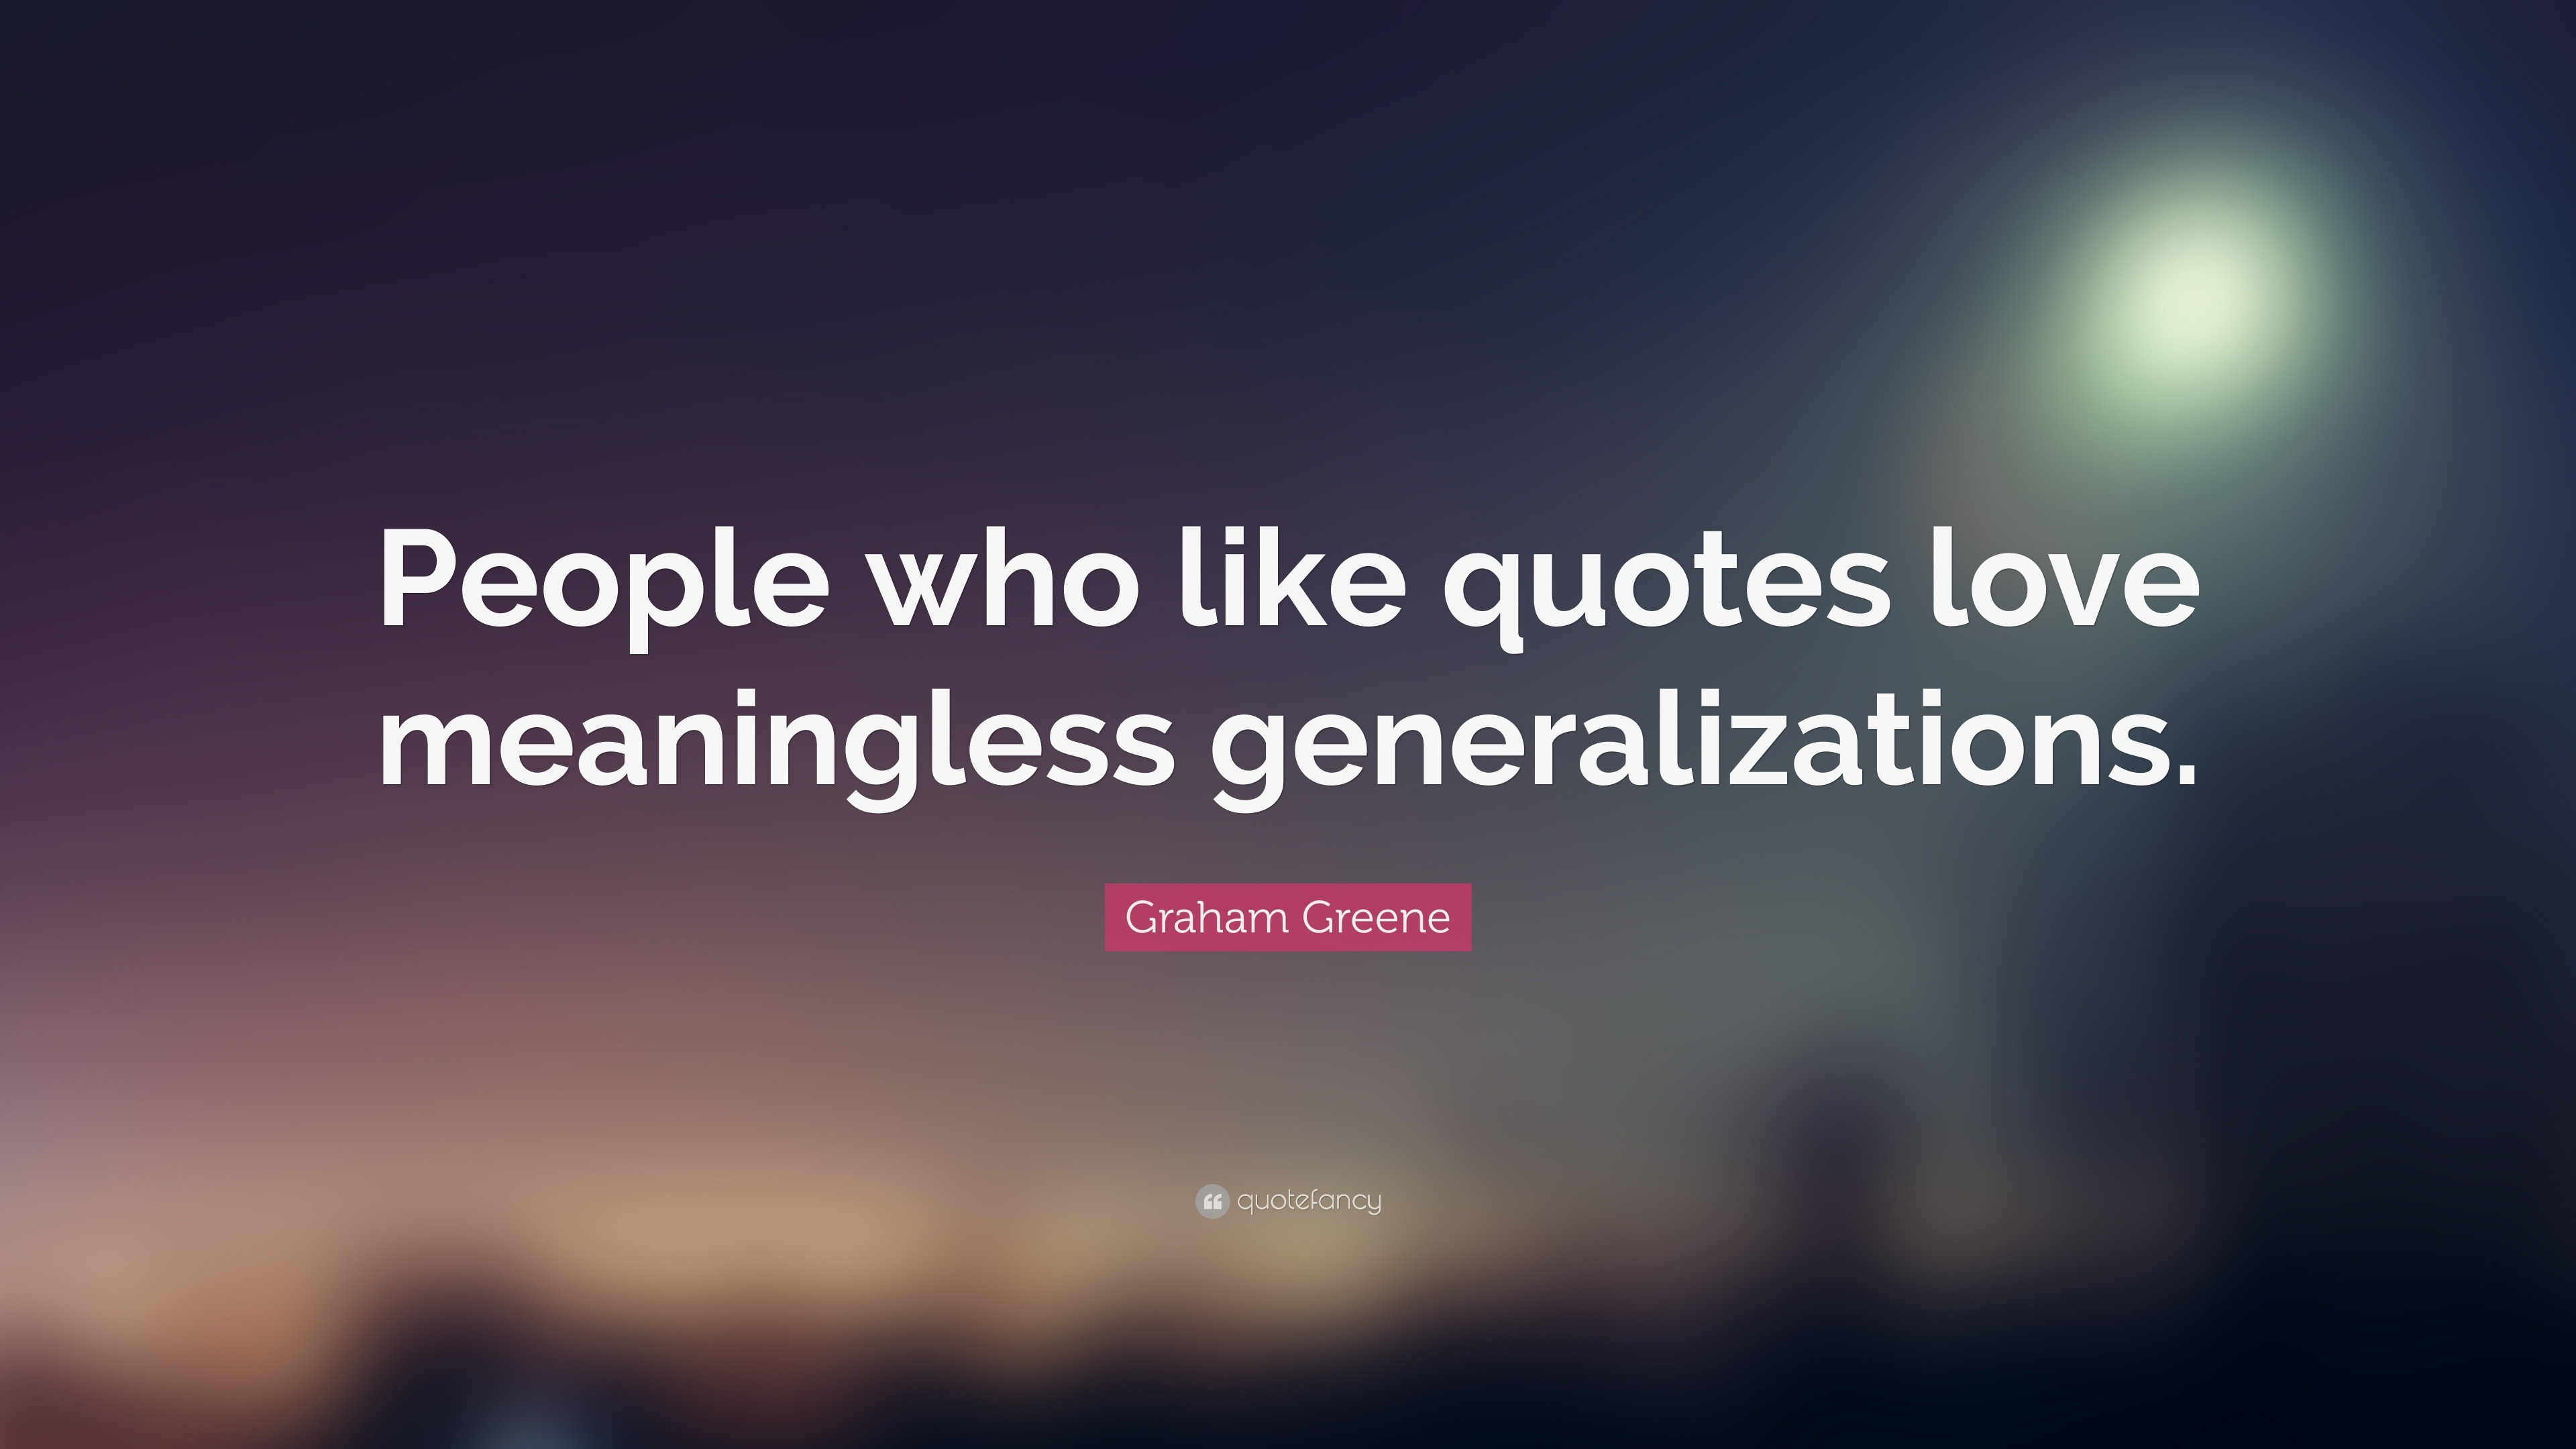 Graham Greene Quote: "People who like quotes love ...